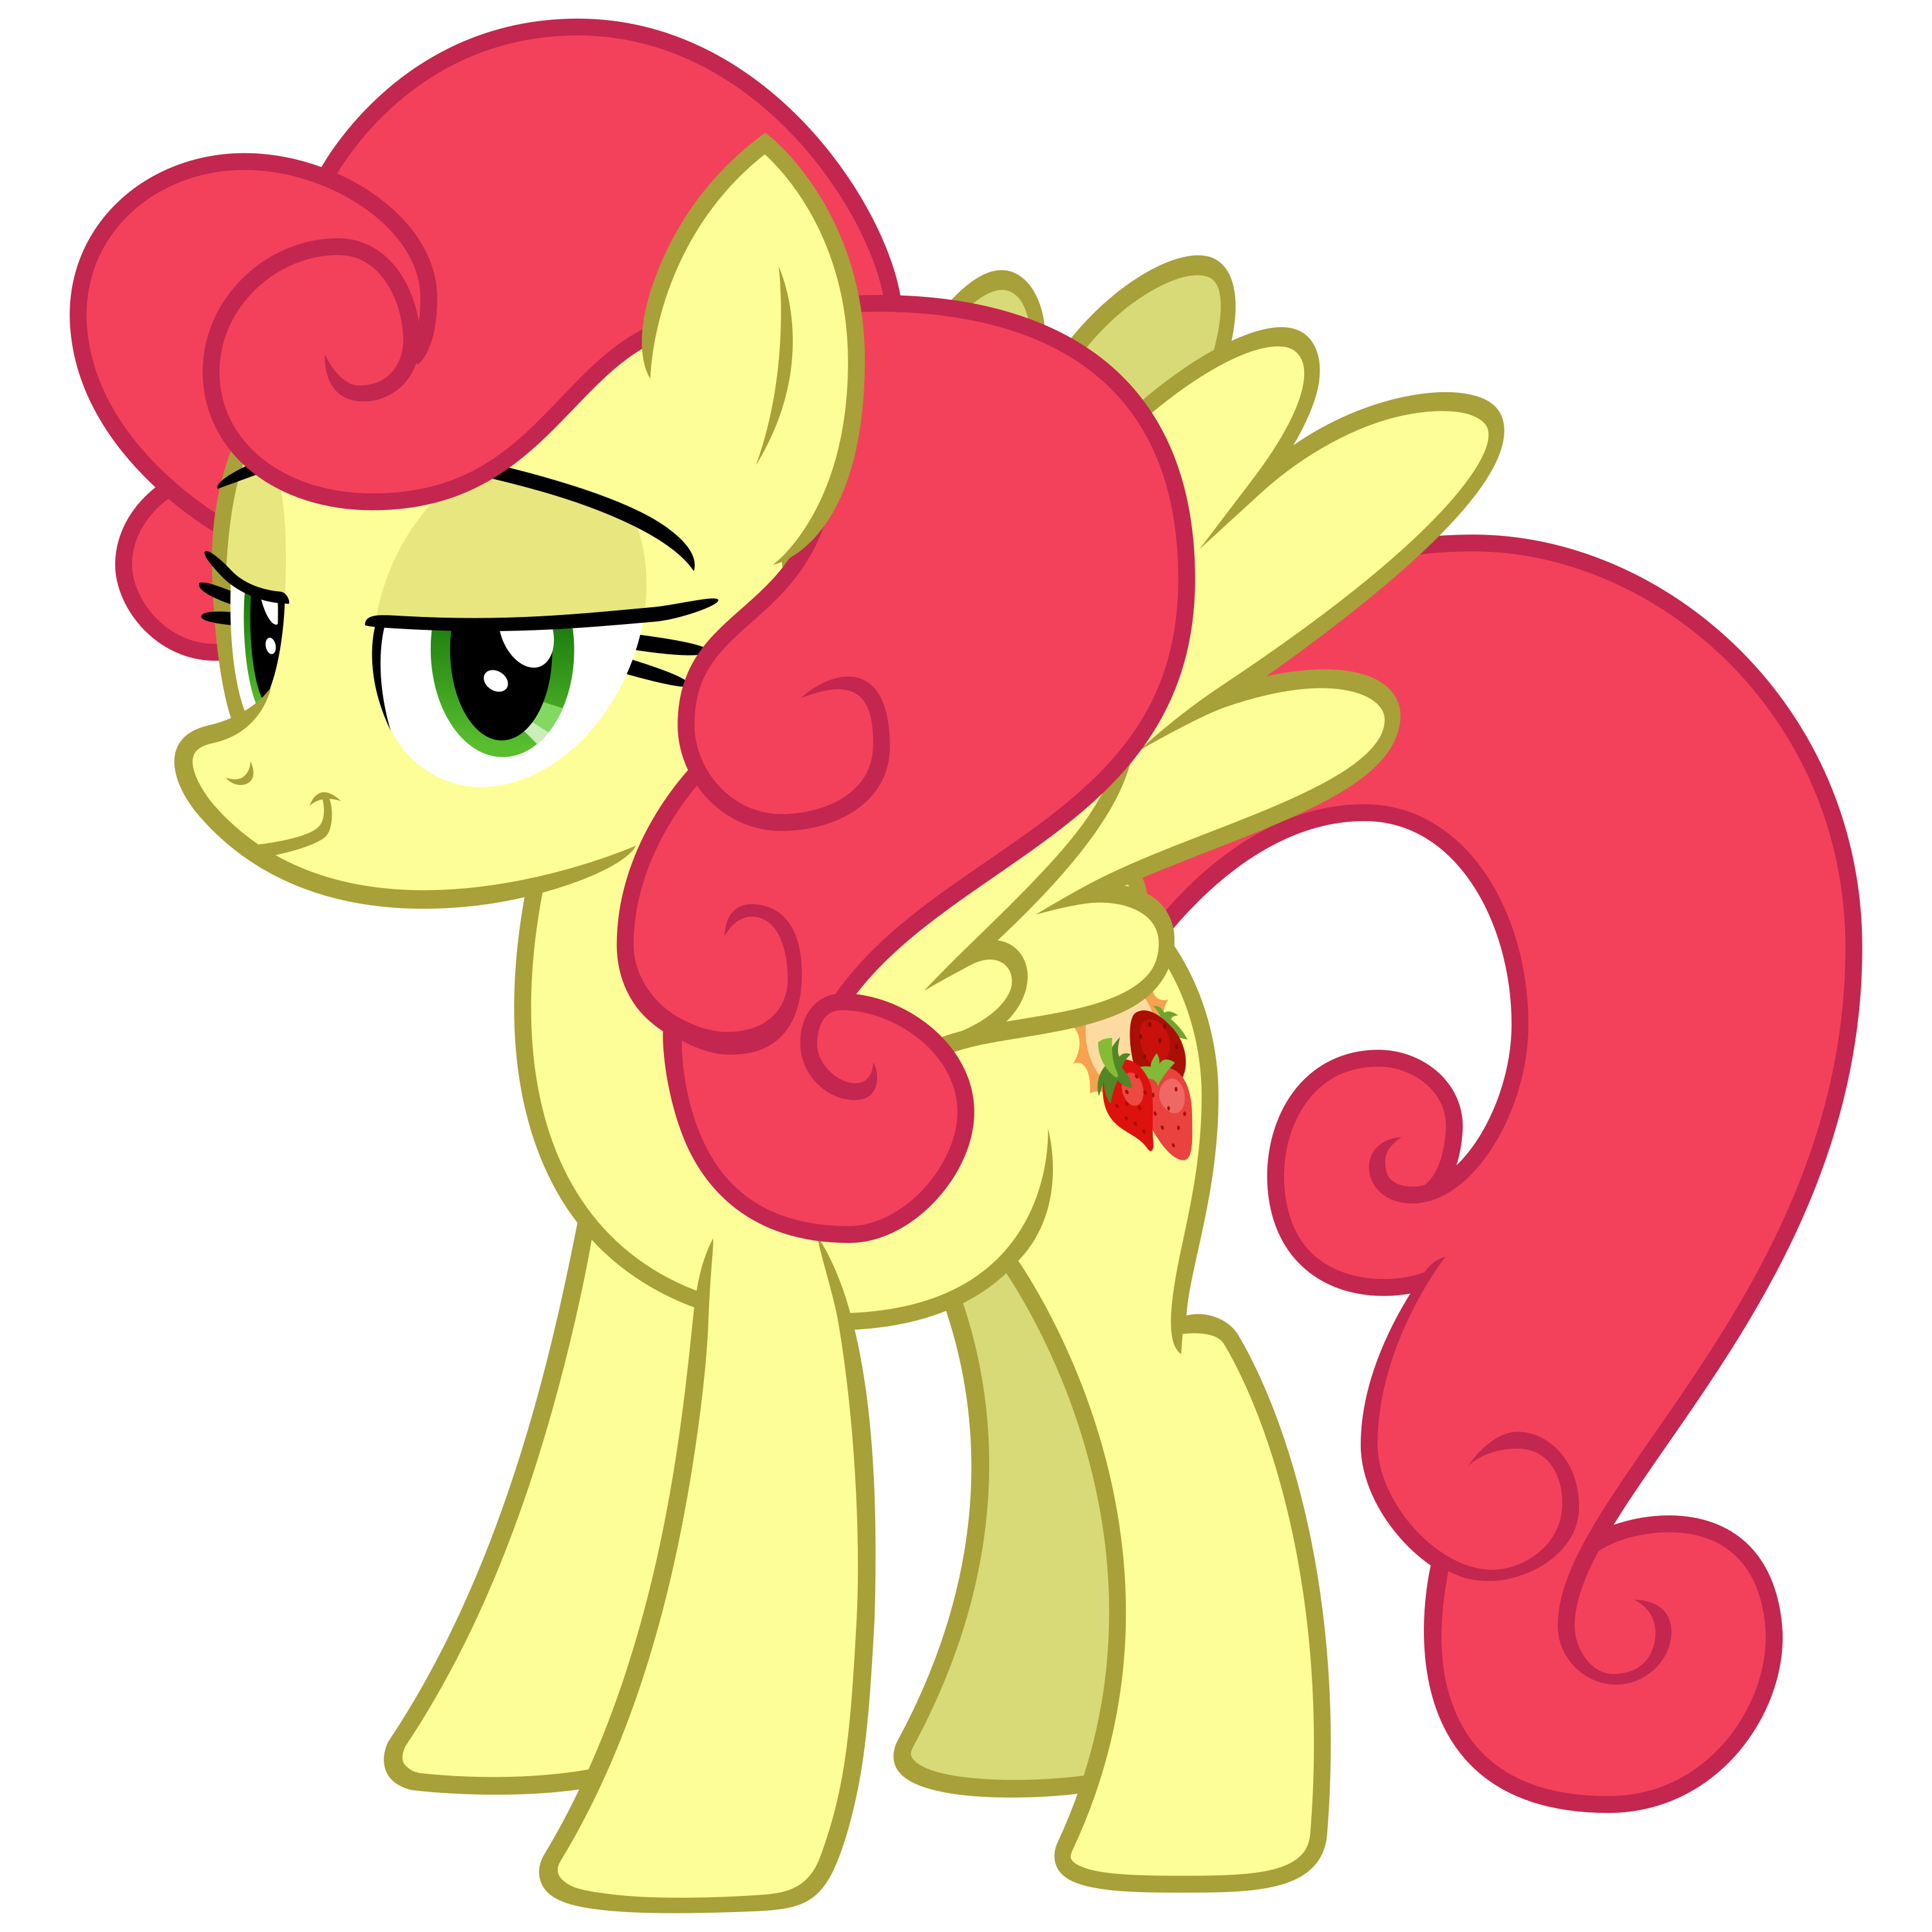 strawberry_sunrise_by_cheezedoodle96-dbc9331.png